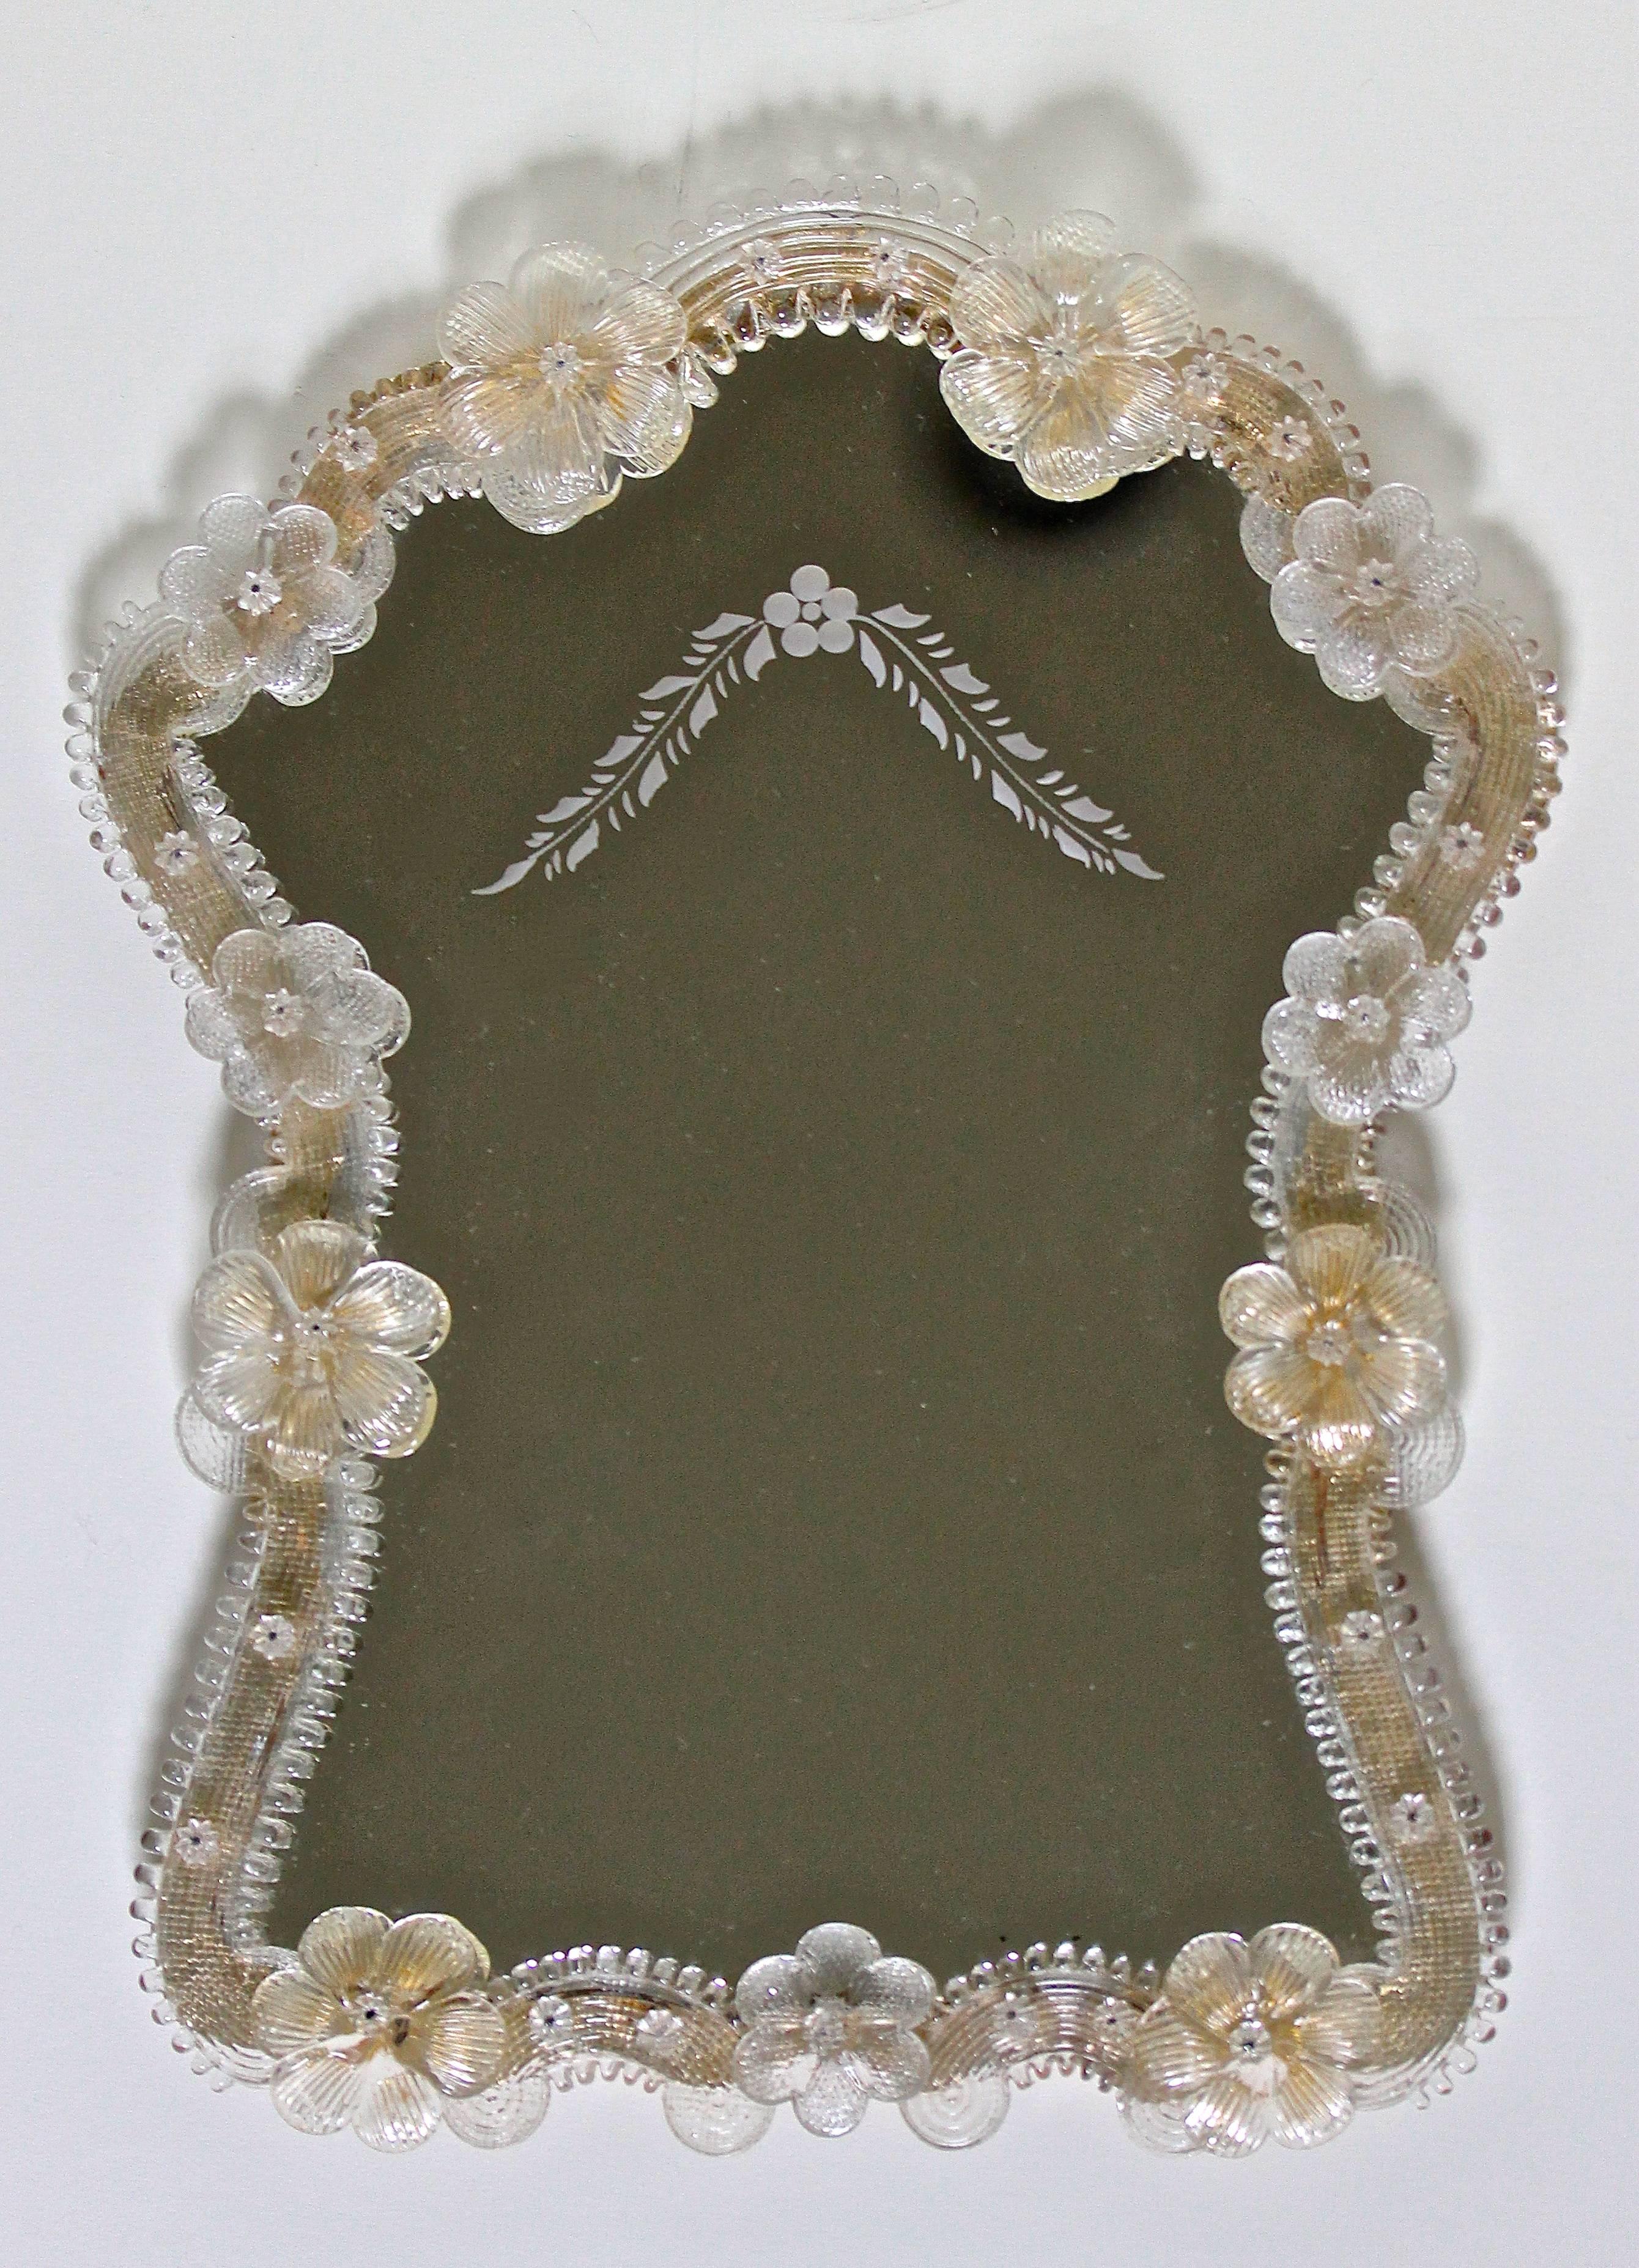 Diminutive Murano floral motif glass wall mirror with reverse etched details on mirrored glass.